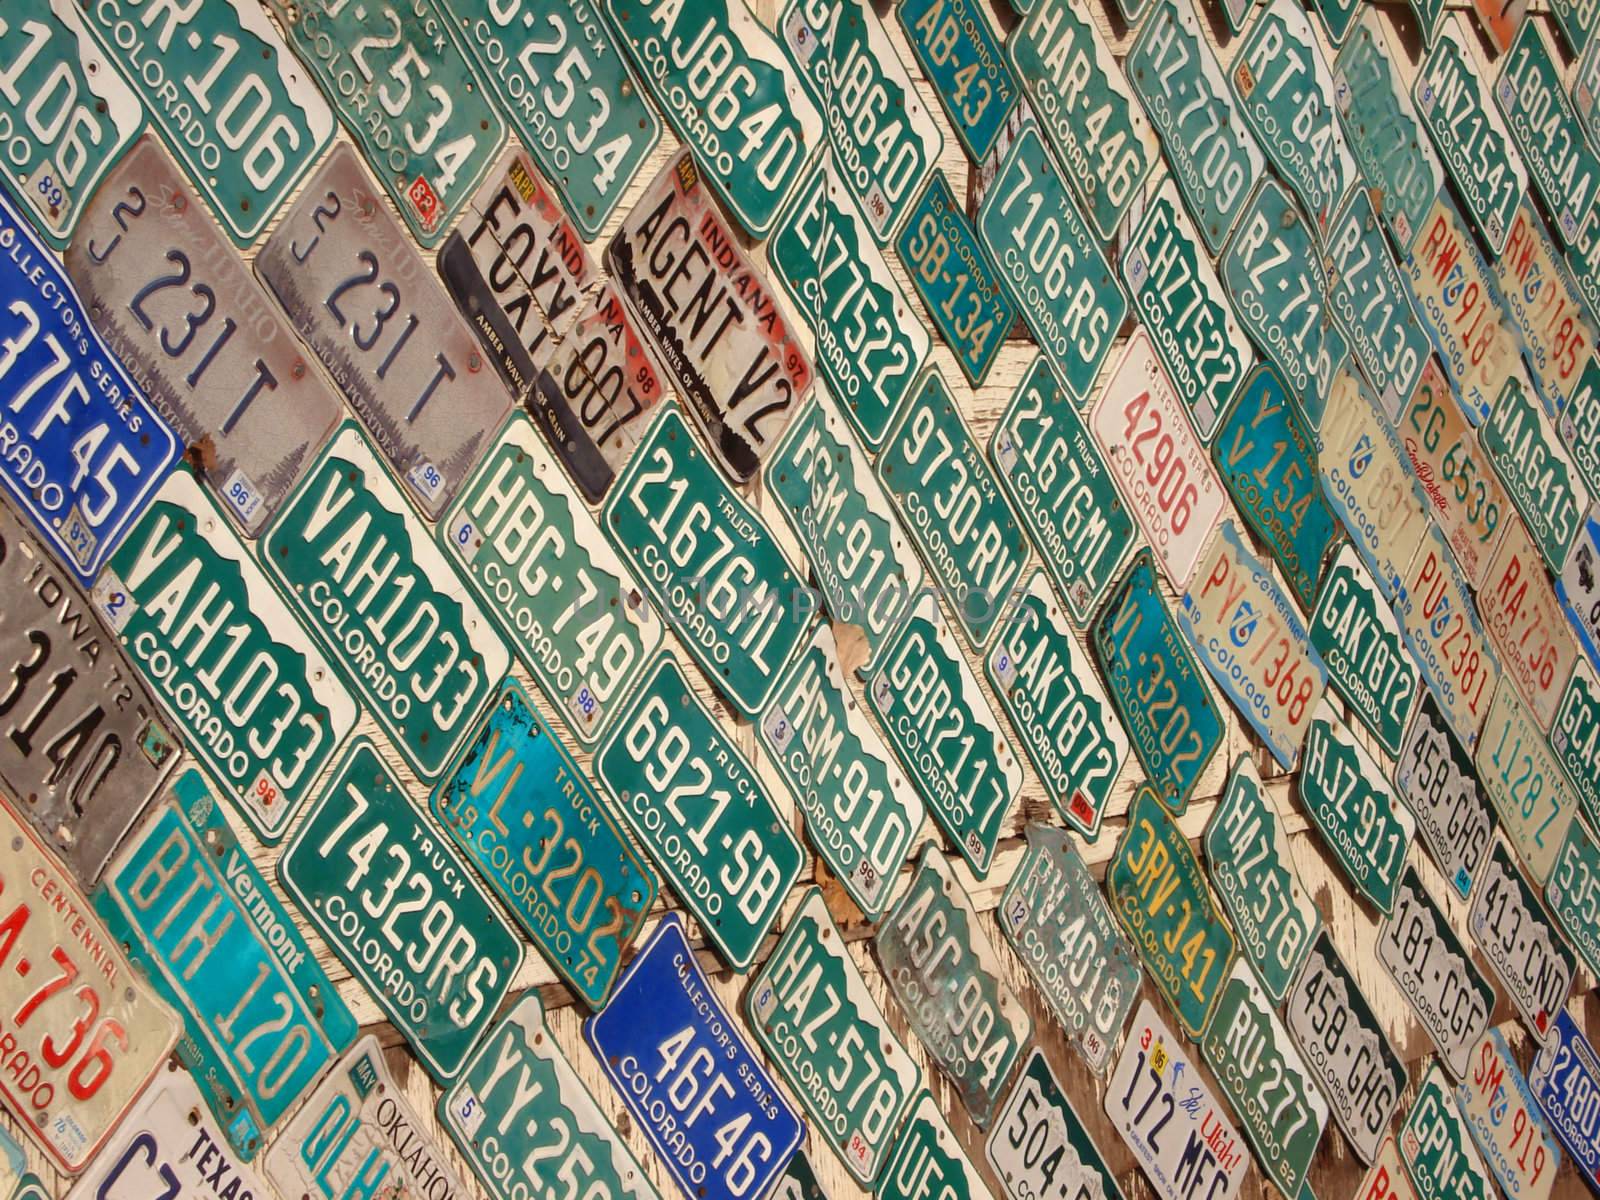 Wall of License Plates by gilmourbto2001